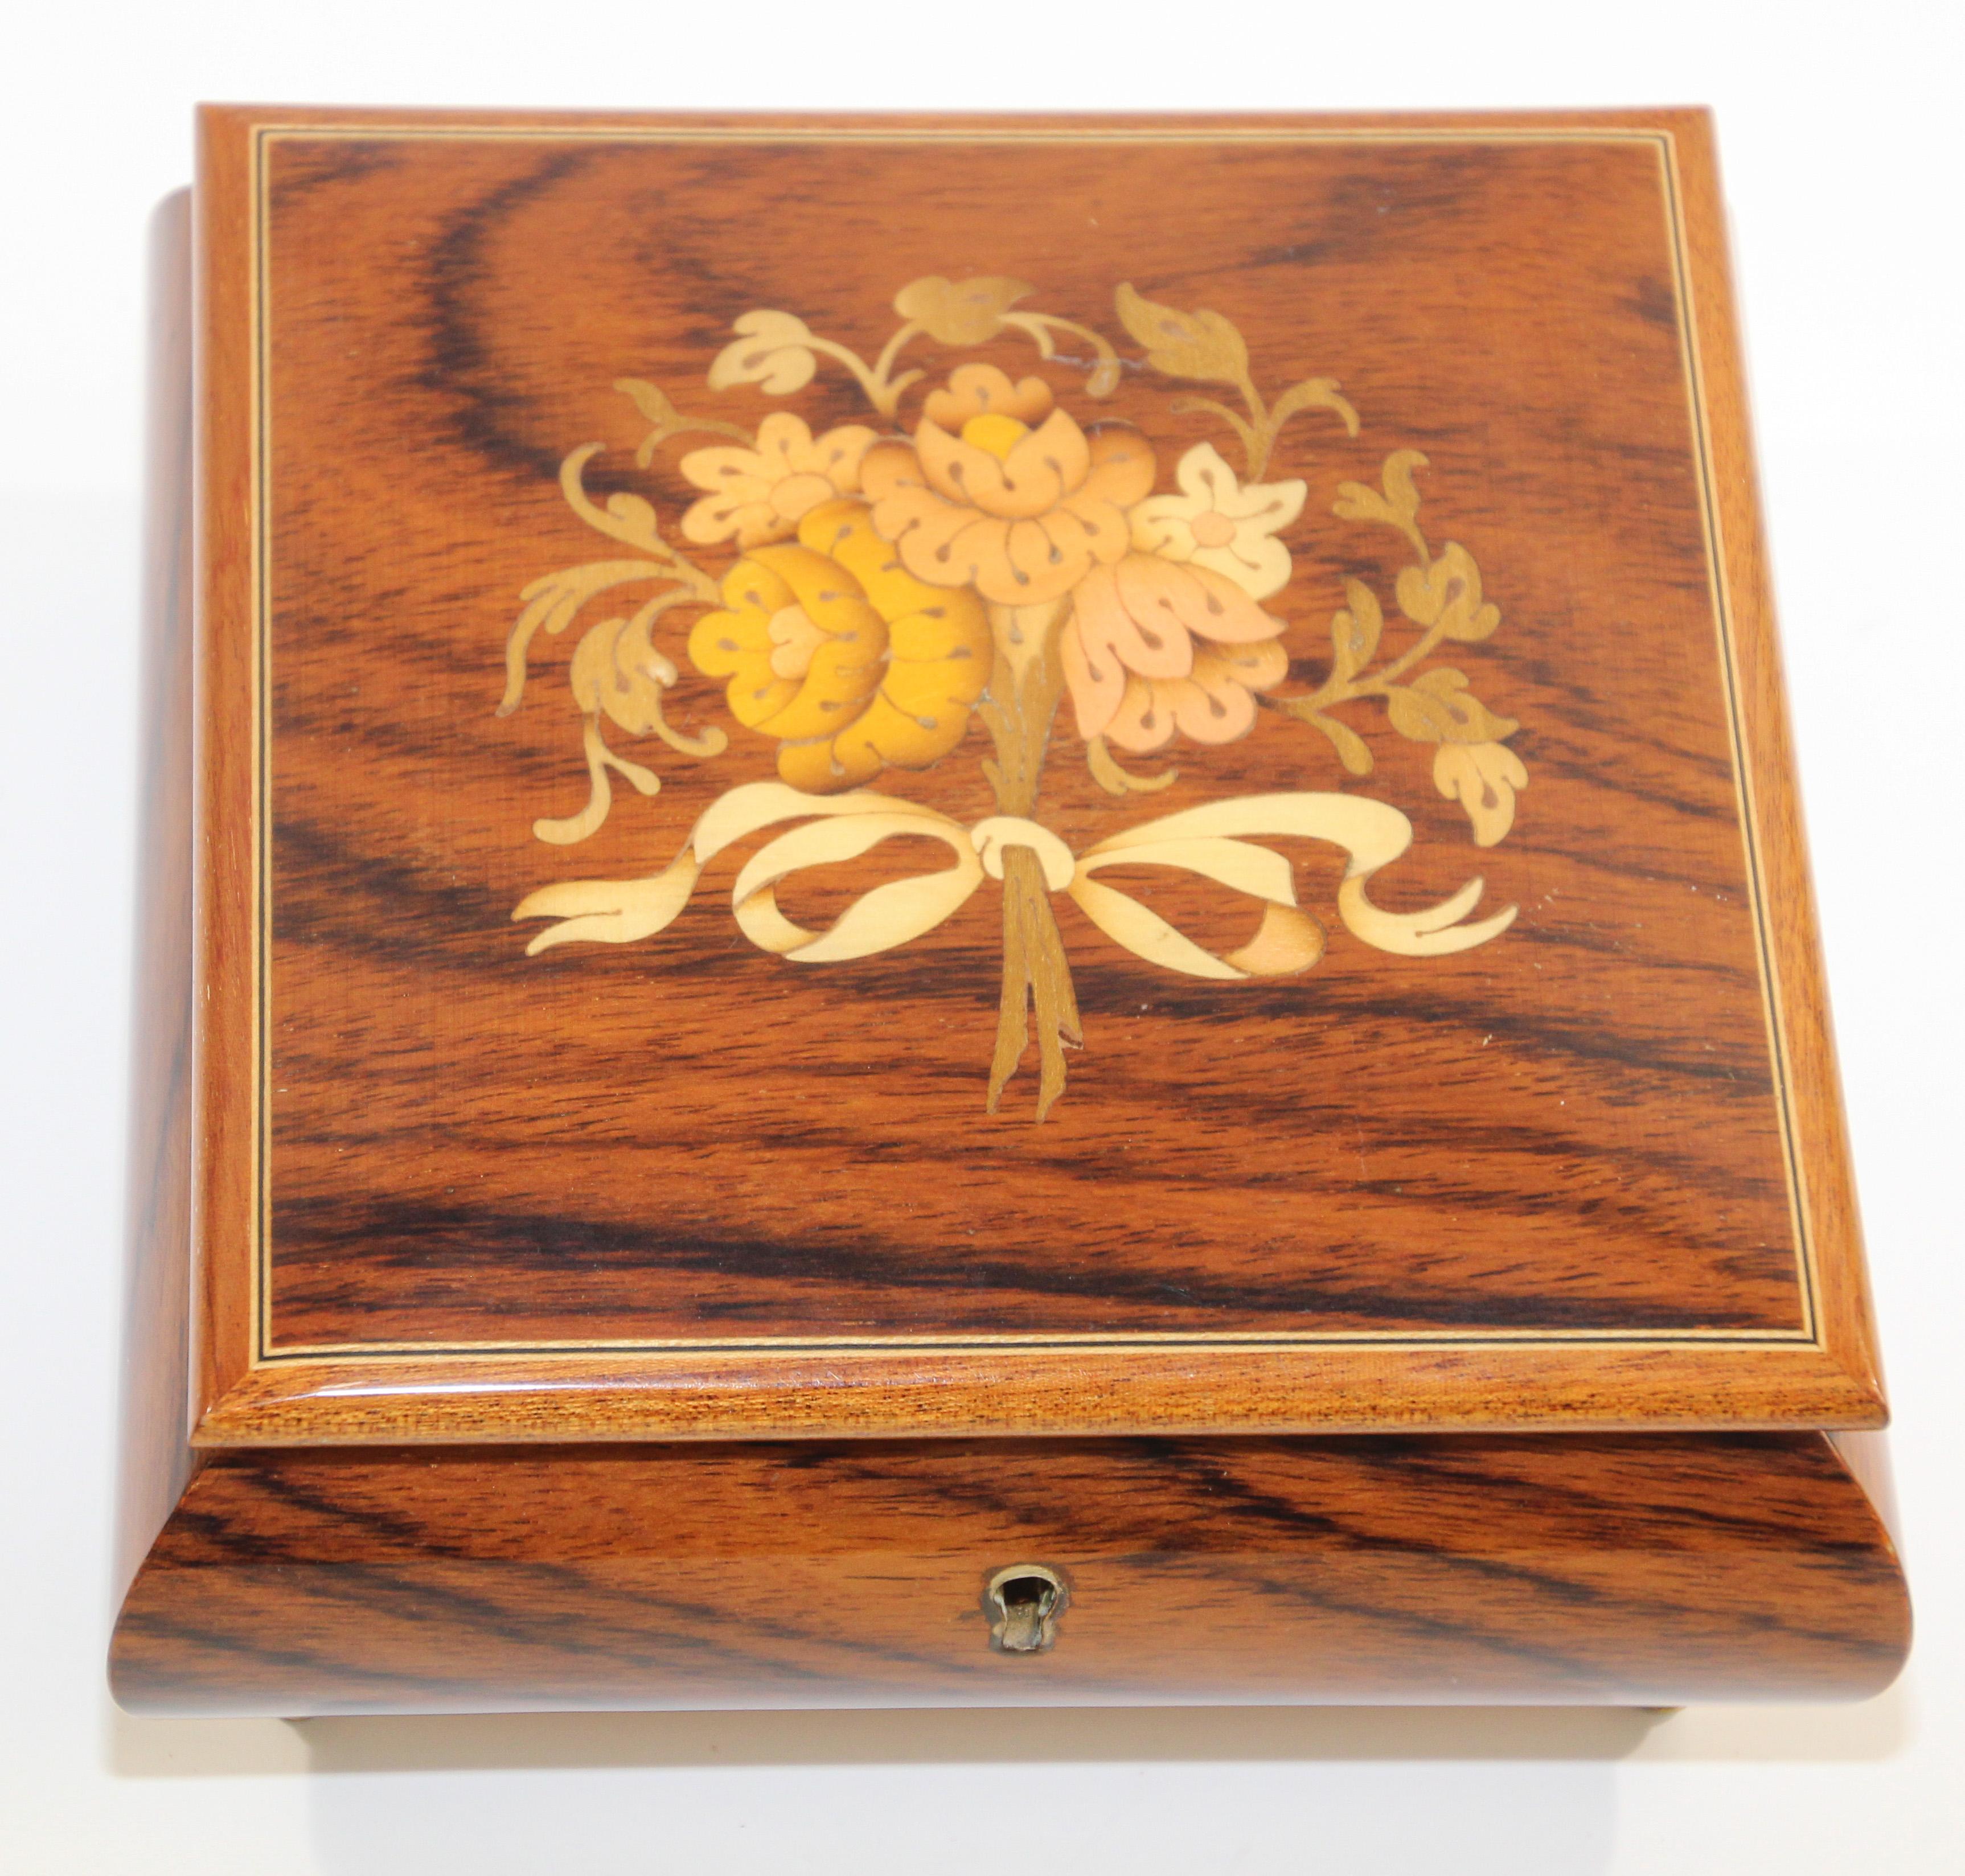 Hand-Crafted Vintage Jewelry Box Hand-Made in Italy